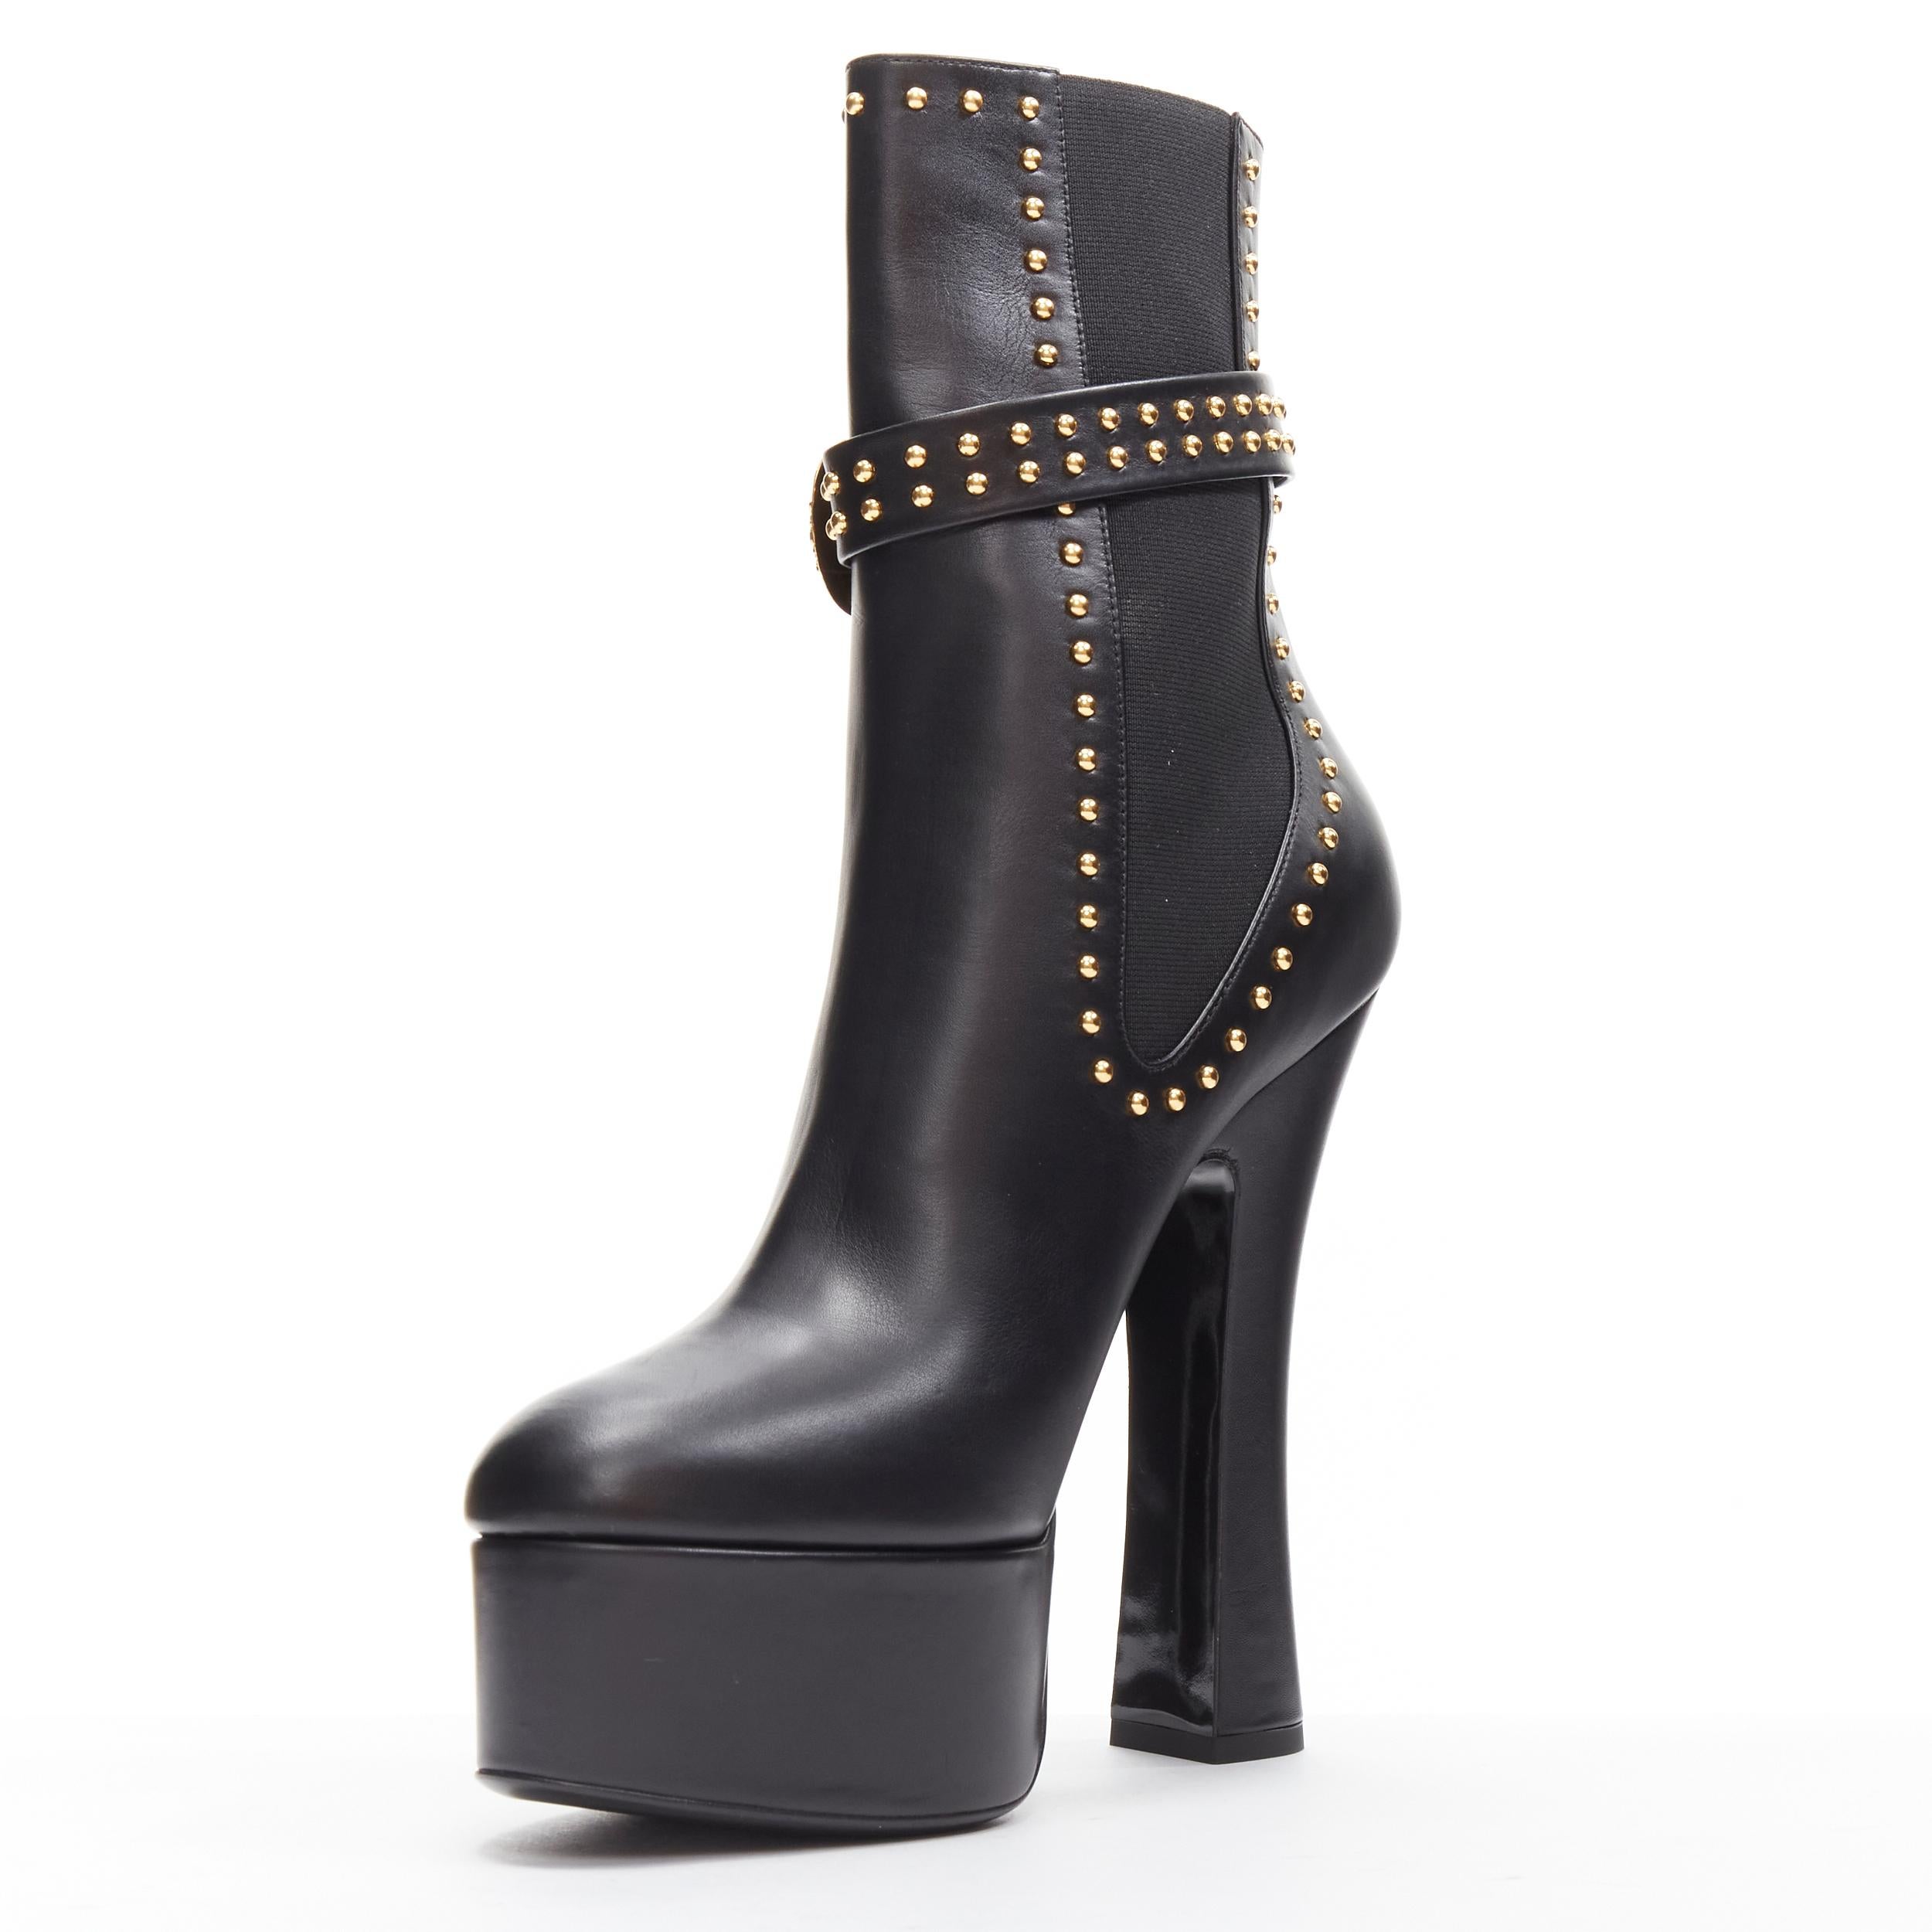 Women's new VERSACE gold studded western buckle black leather platform boots EU40.5 For Sale